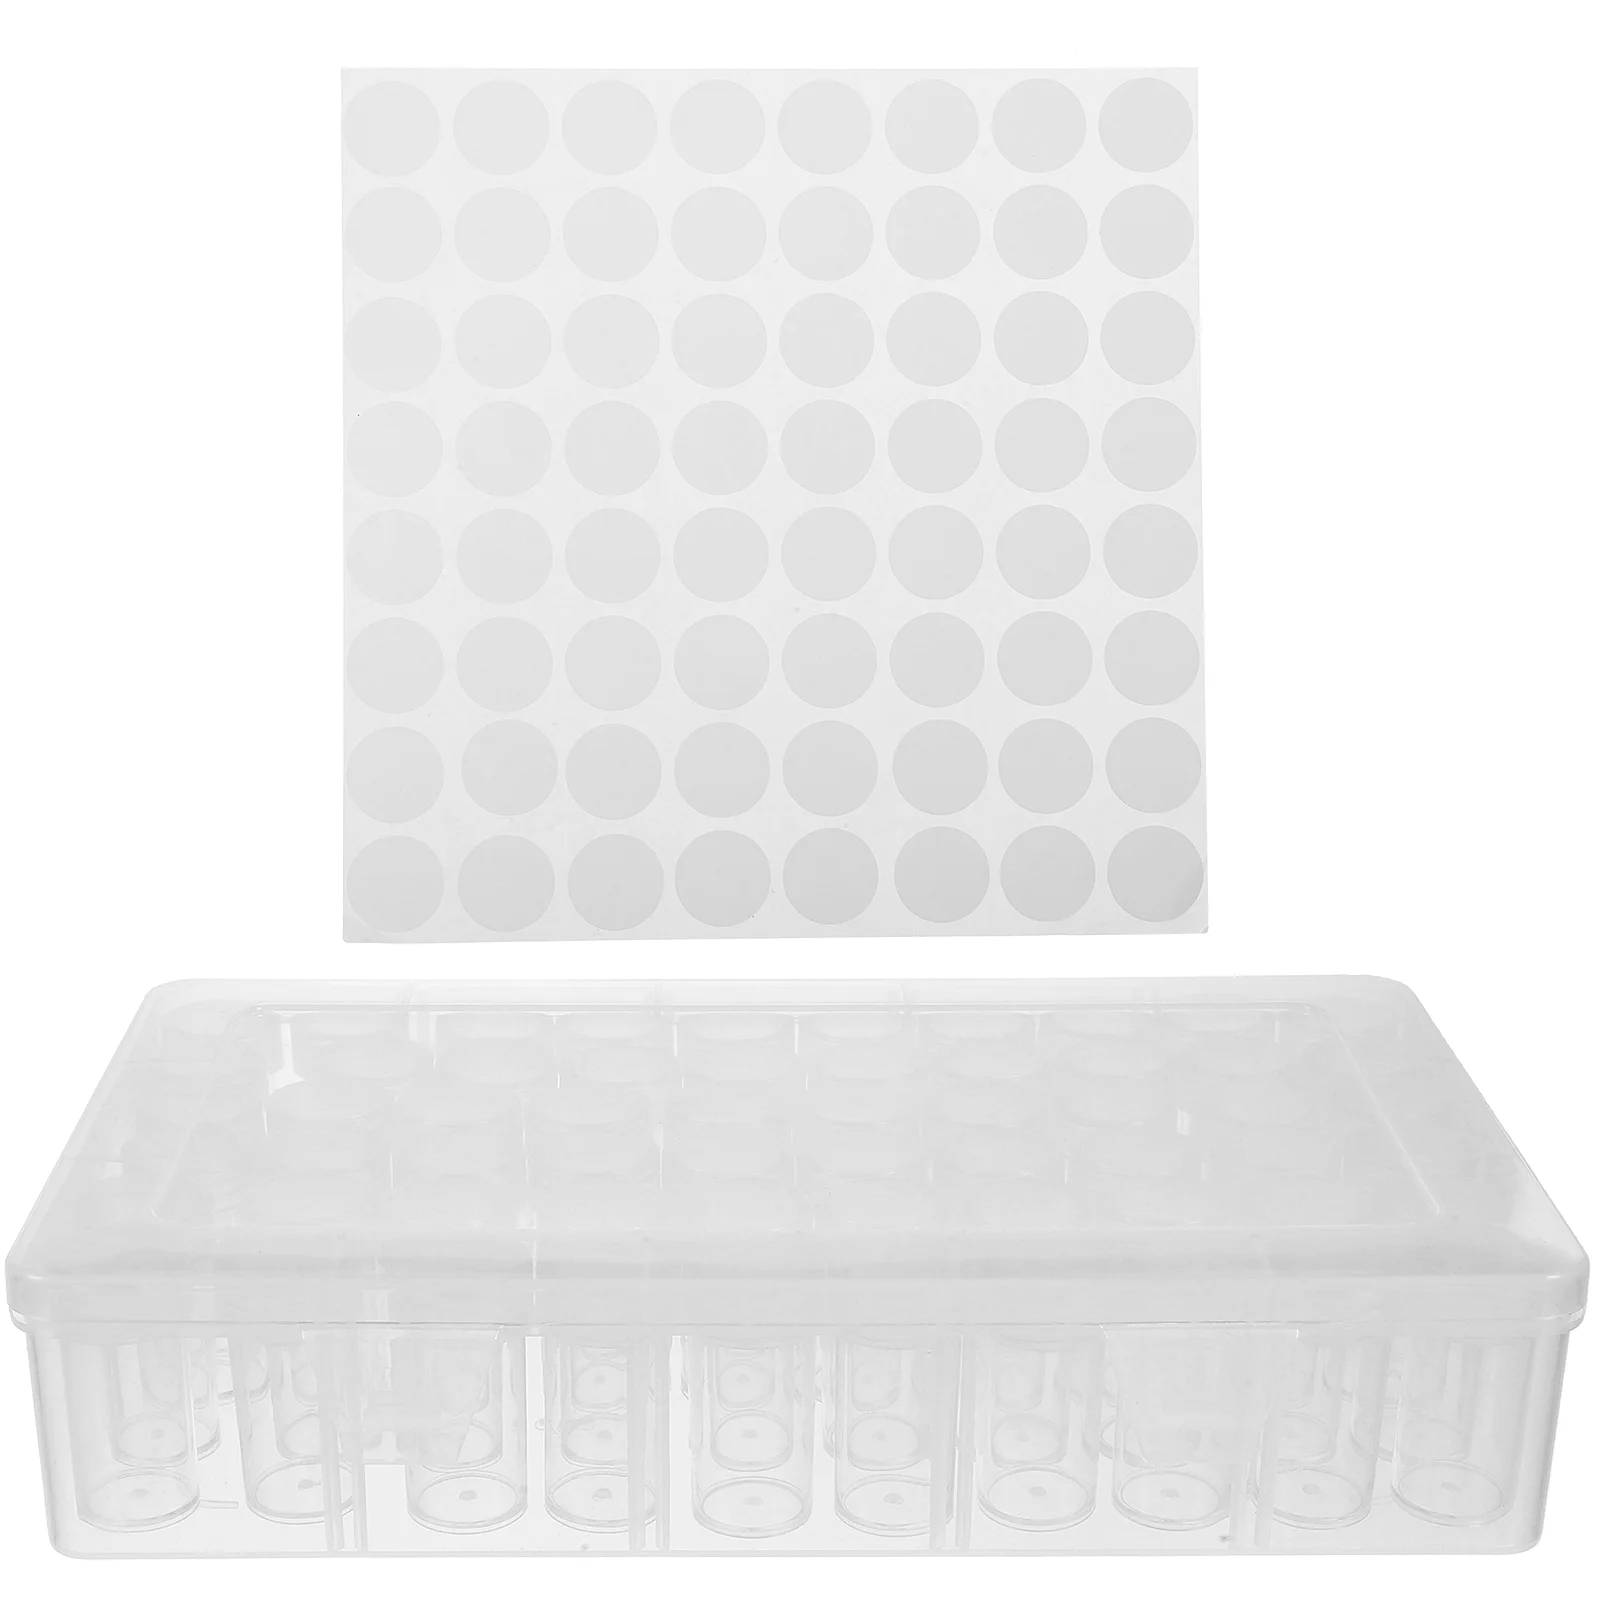 

Transparent Storage Box Seed Containers Plastic Organizer Small Parts Holder Organizers Craft Jewelry Making Clay Clear